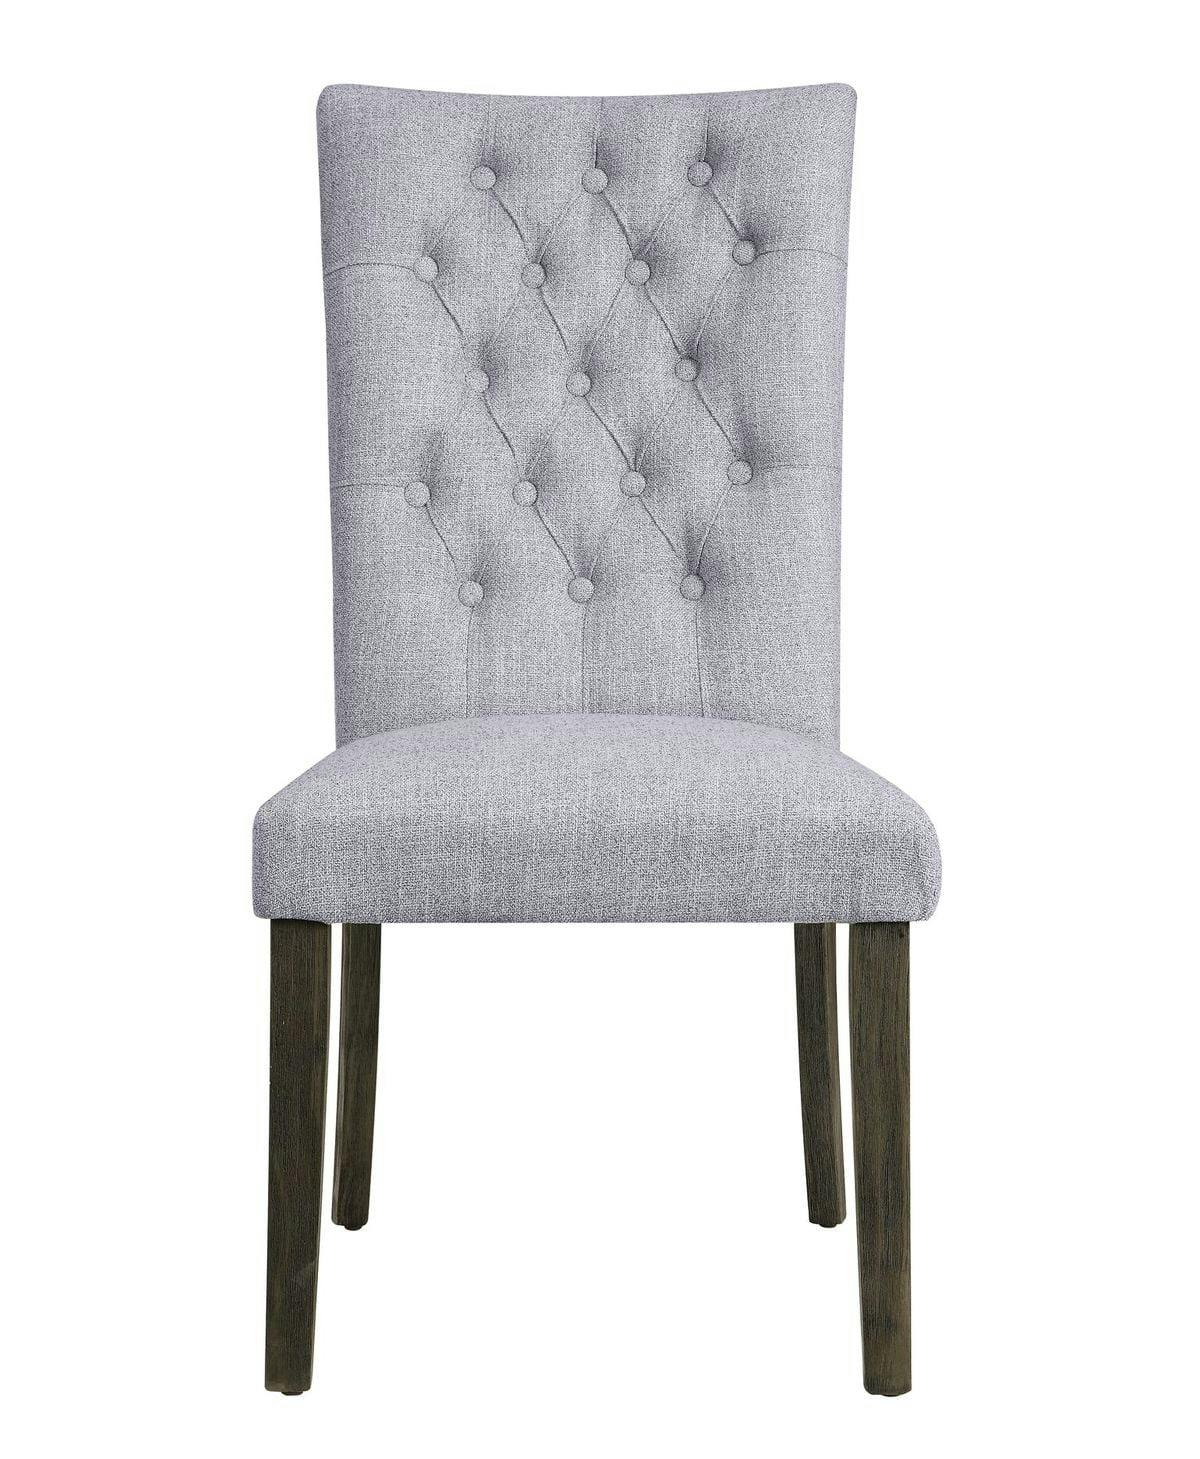 Heather Gray Linen Upholstered Parsons Side Chair with Button Tufting